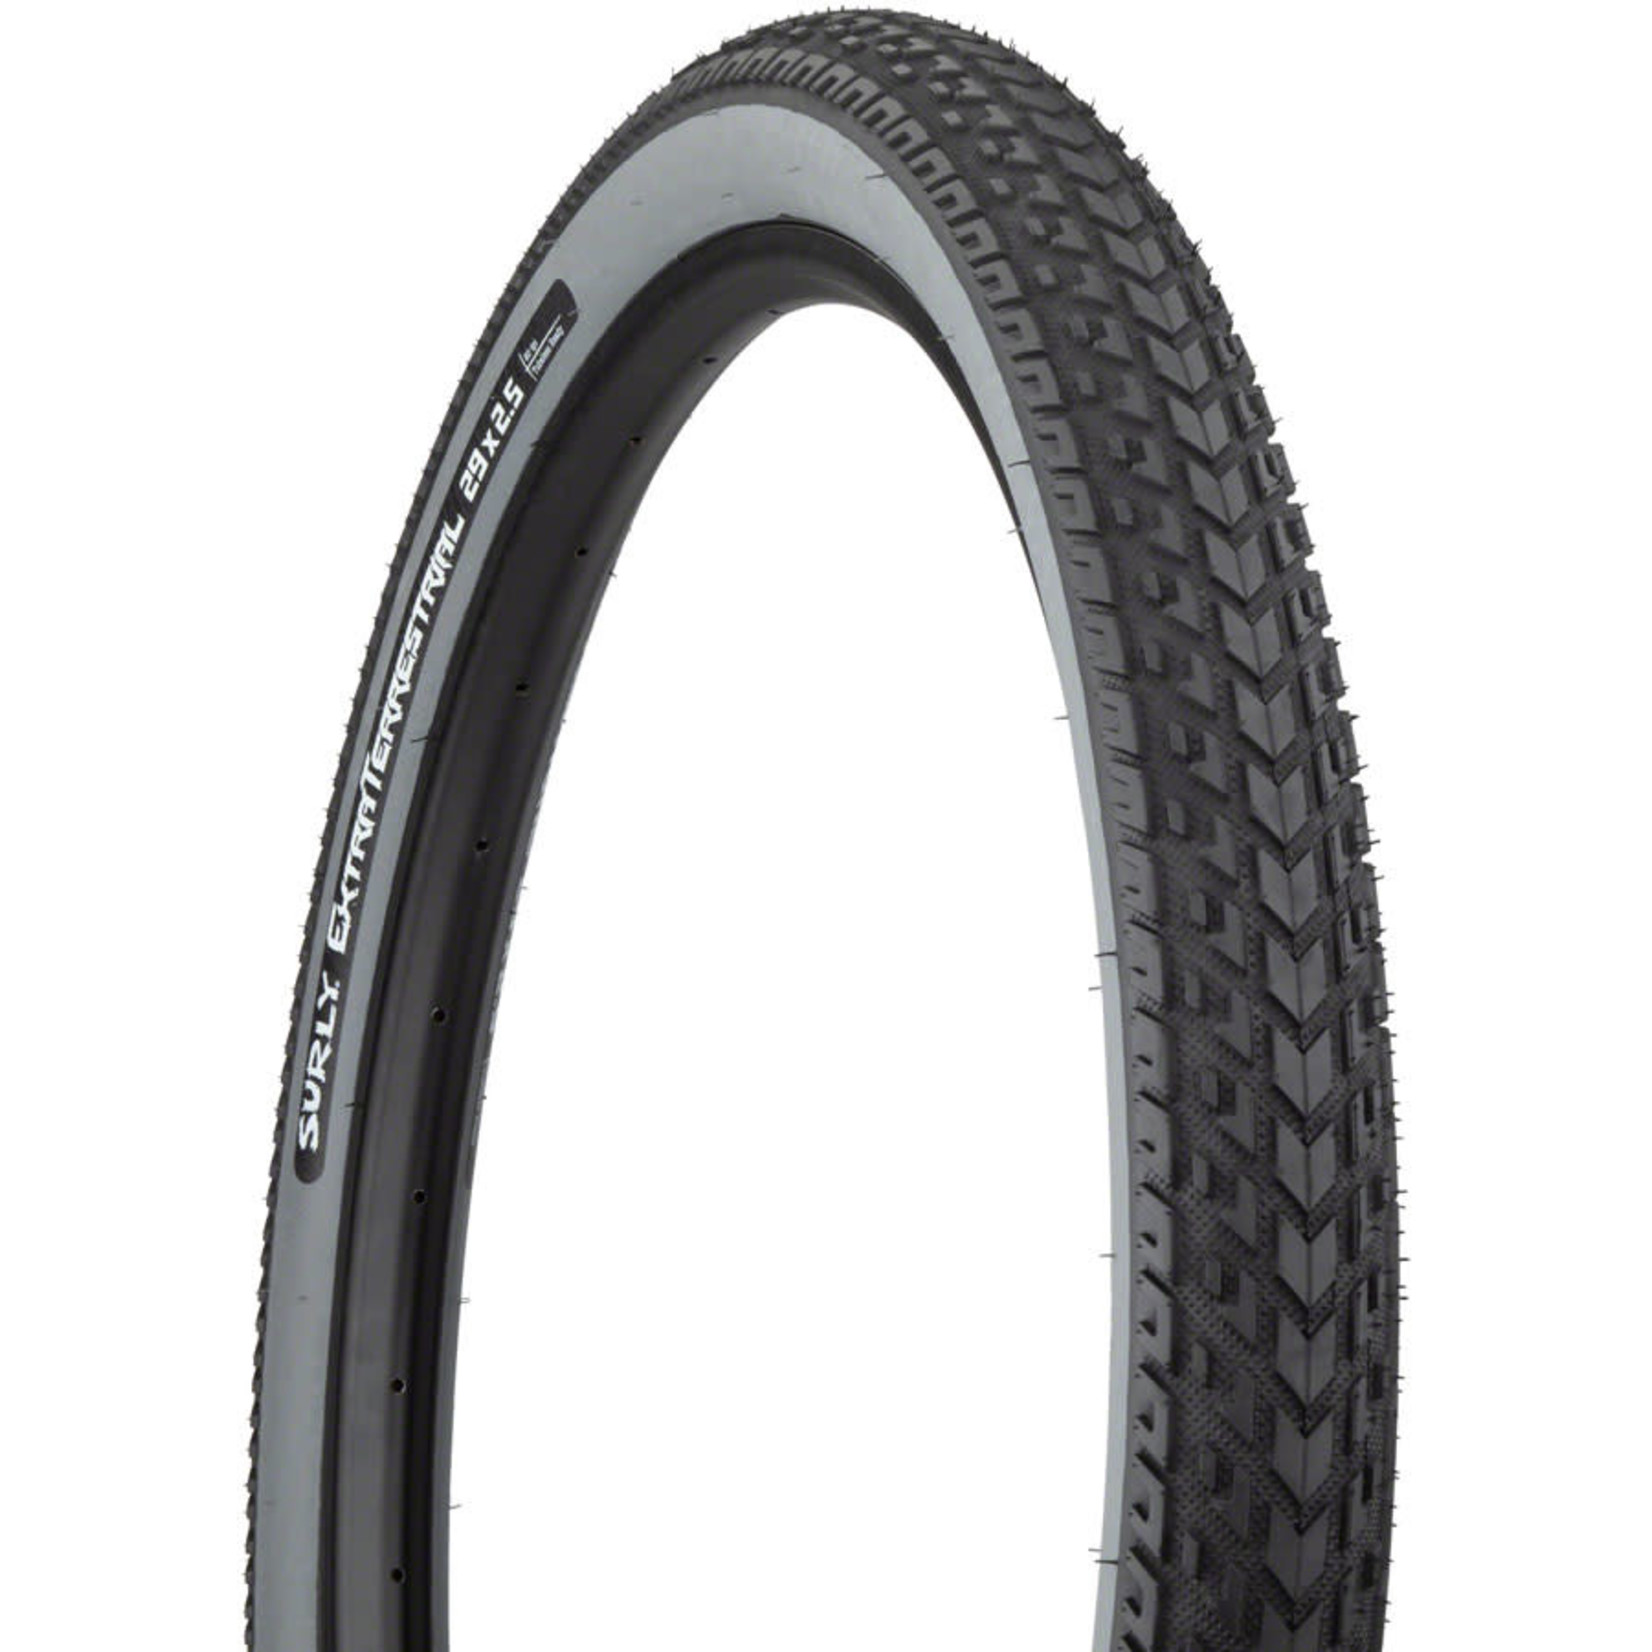 Surly Surly ExtraTerrestrial  Tire - 29 x 2.5, Tubeless, Folding, Black/Slate, 60tpi